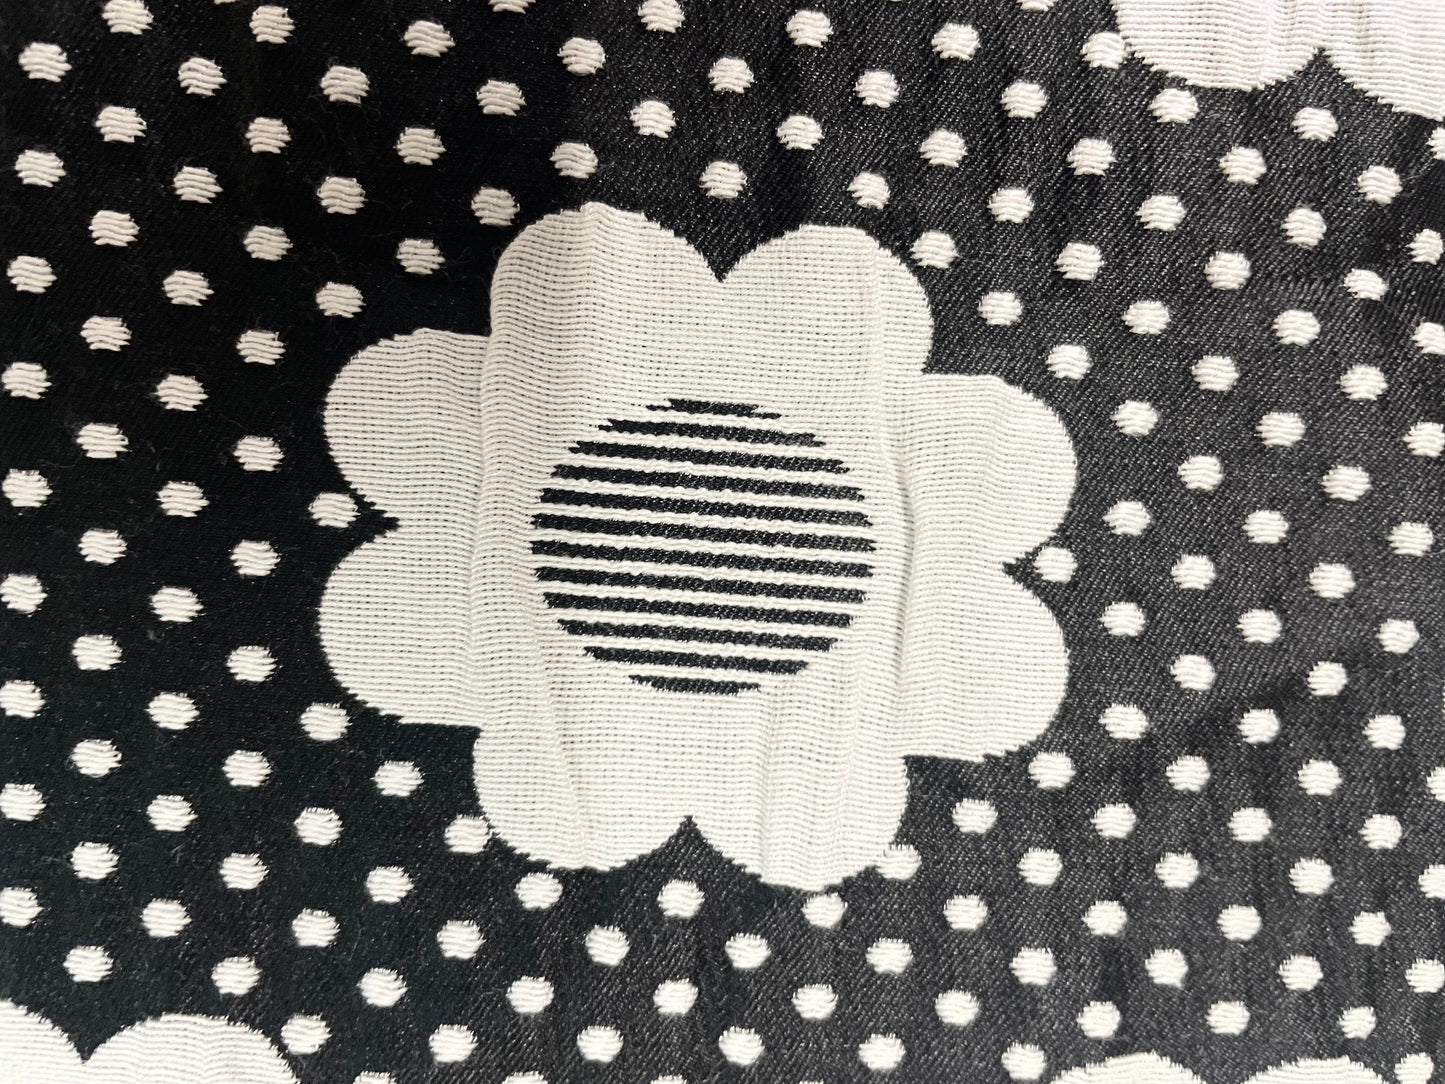 Textured Double Faced Floral Print - Black and White